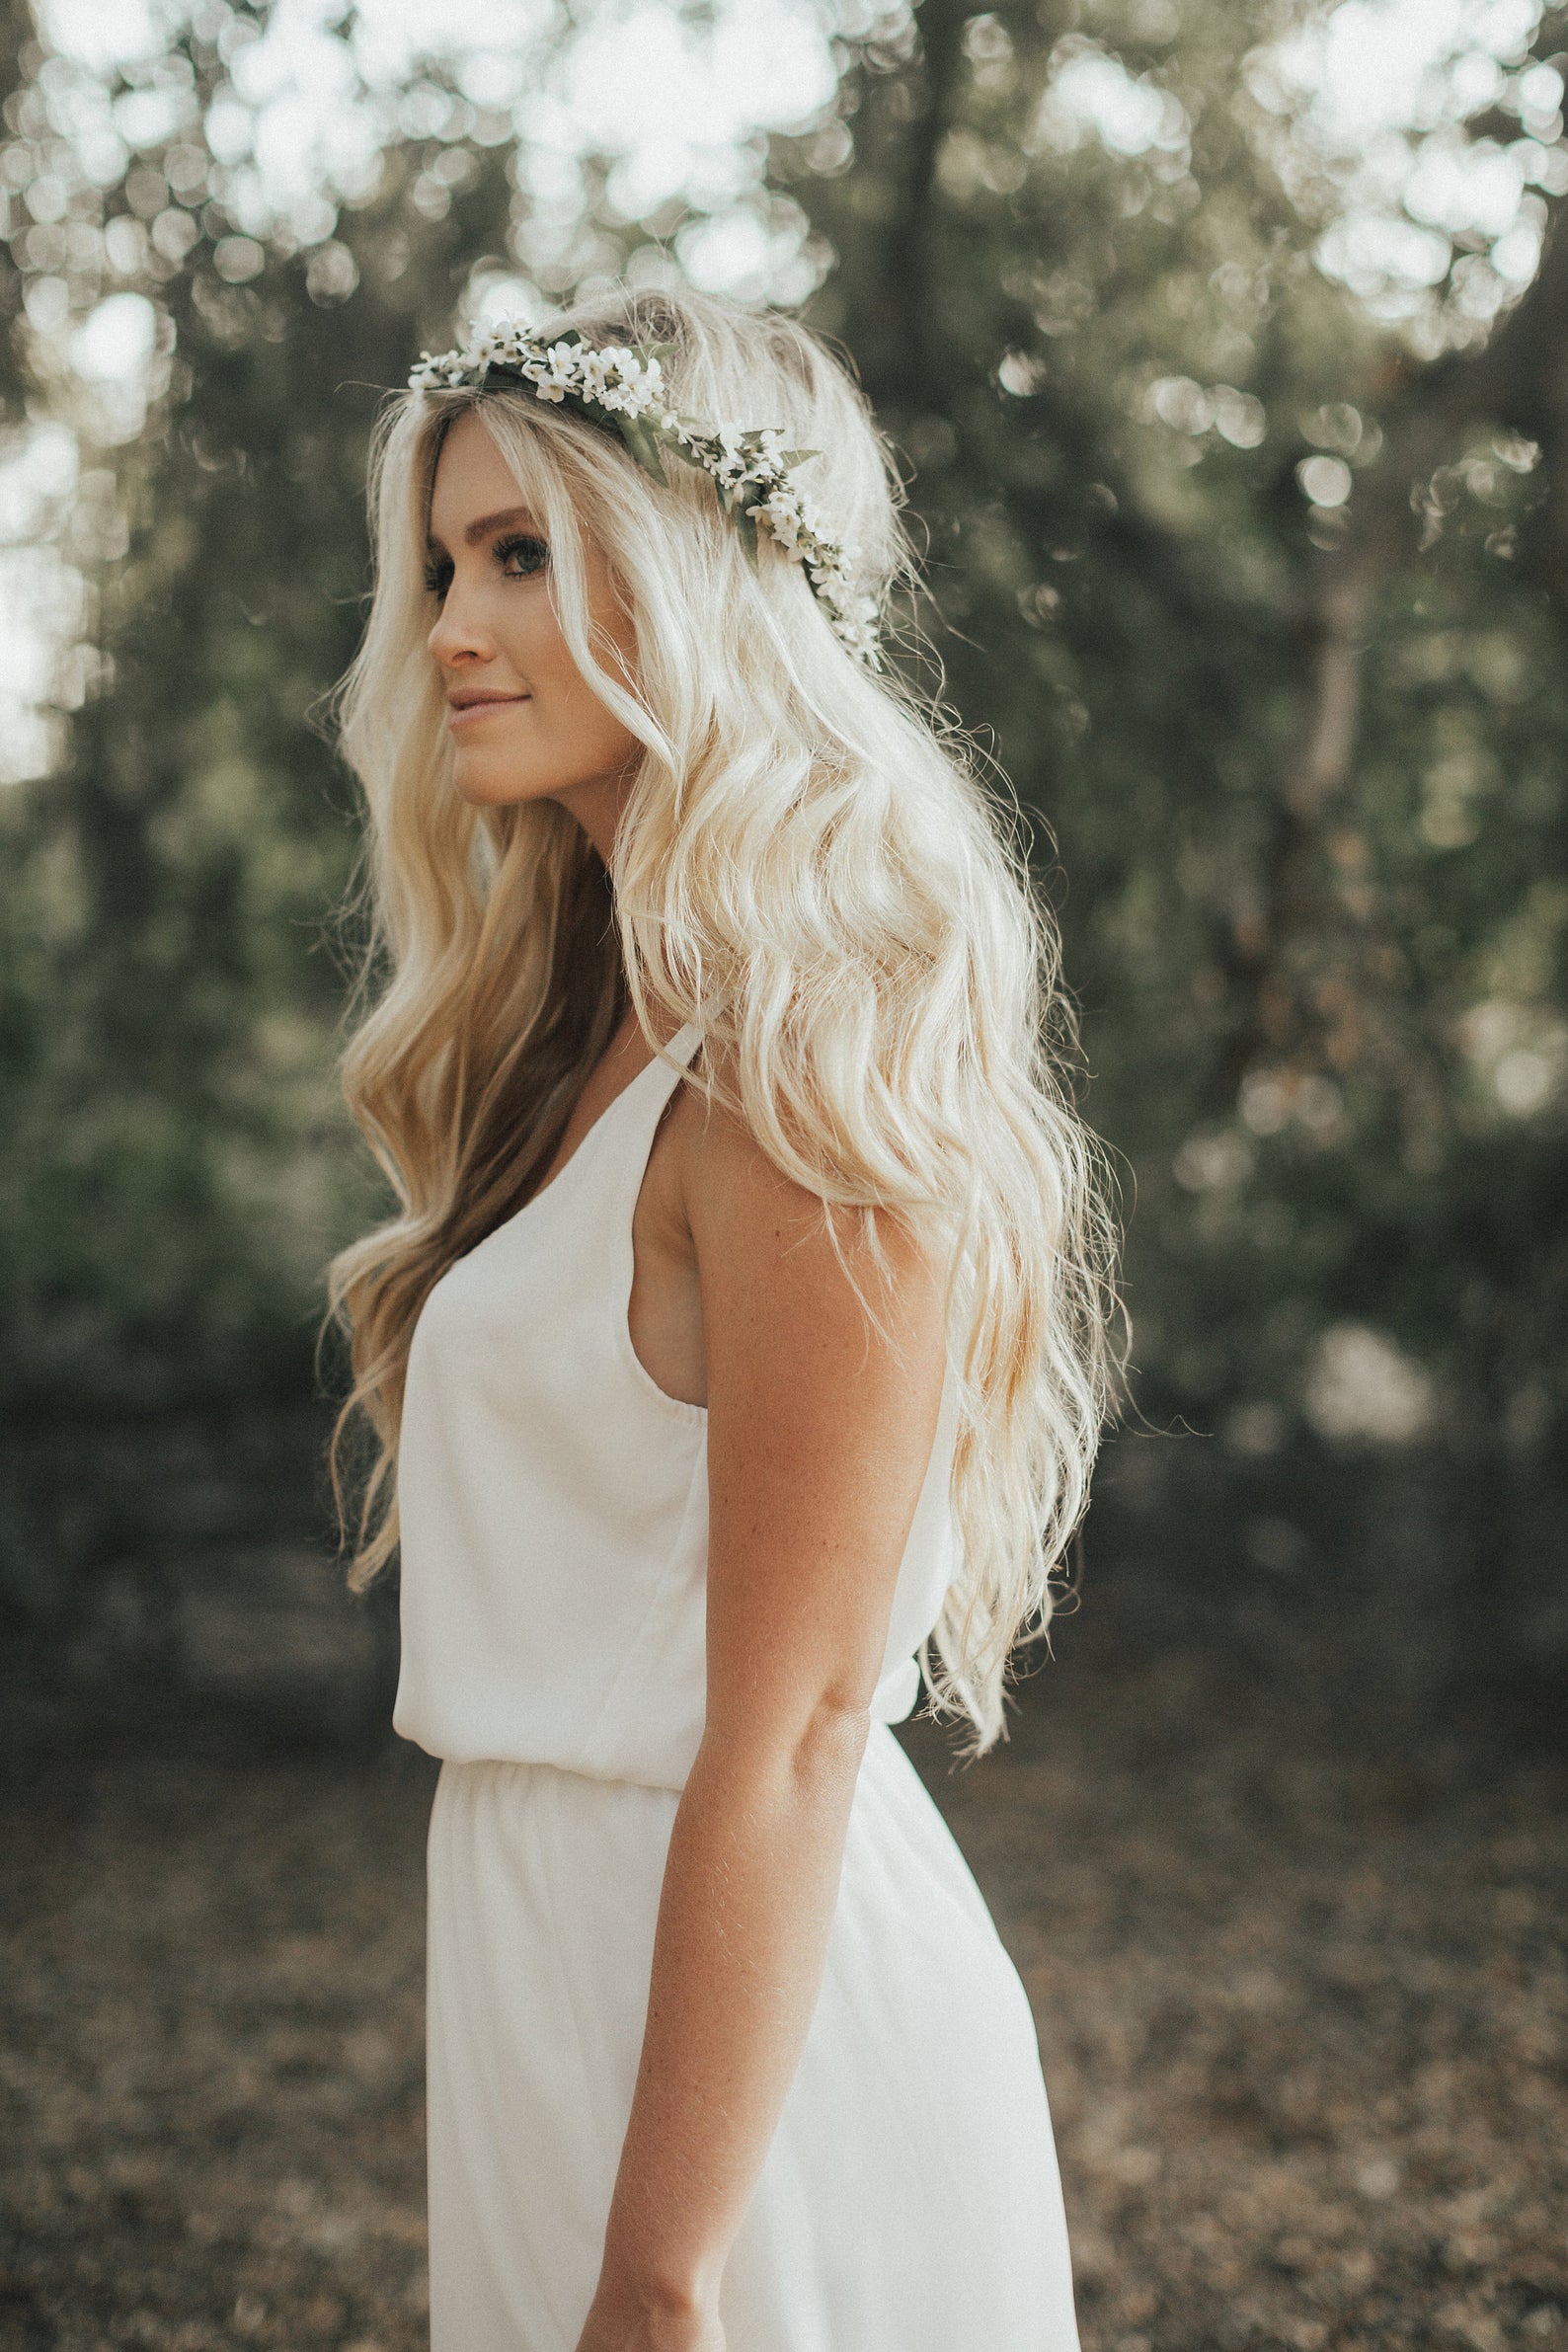 boho bride with long blonde hair wearing it down on waves, adorned with a delicate floral crown